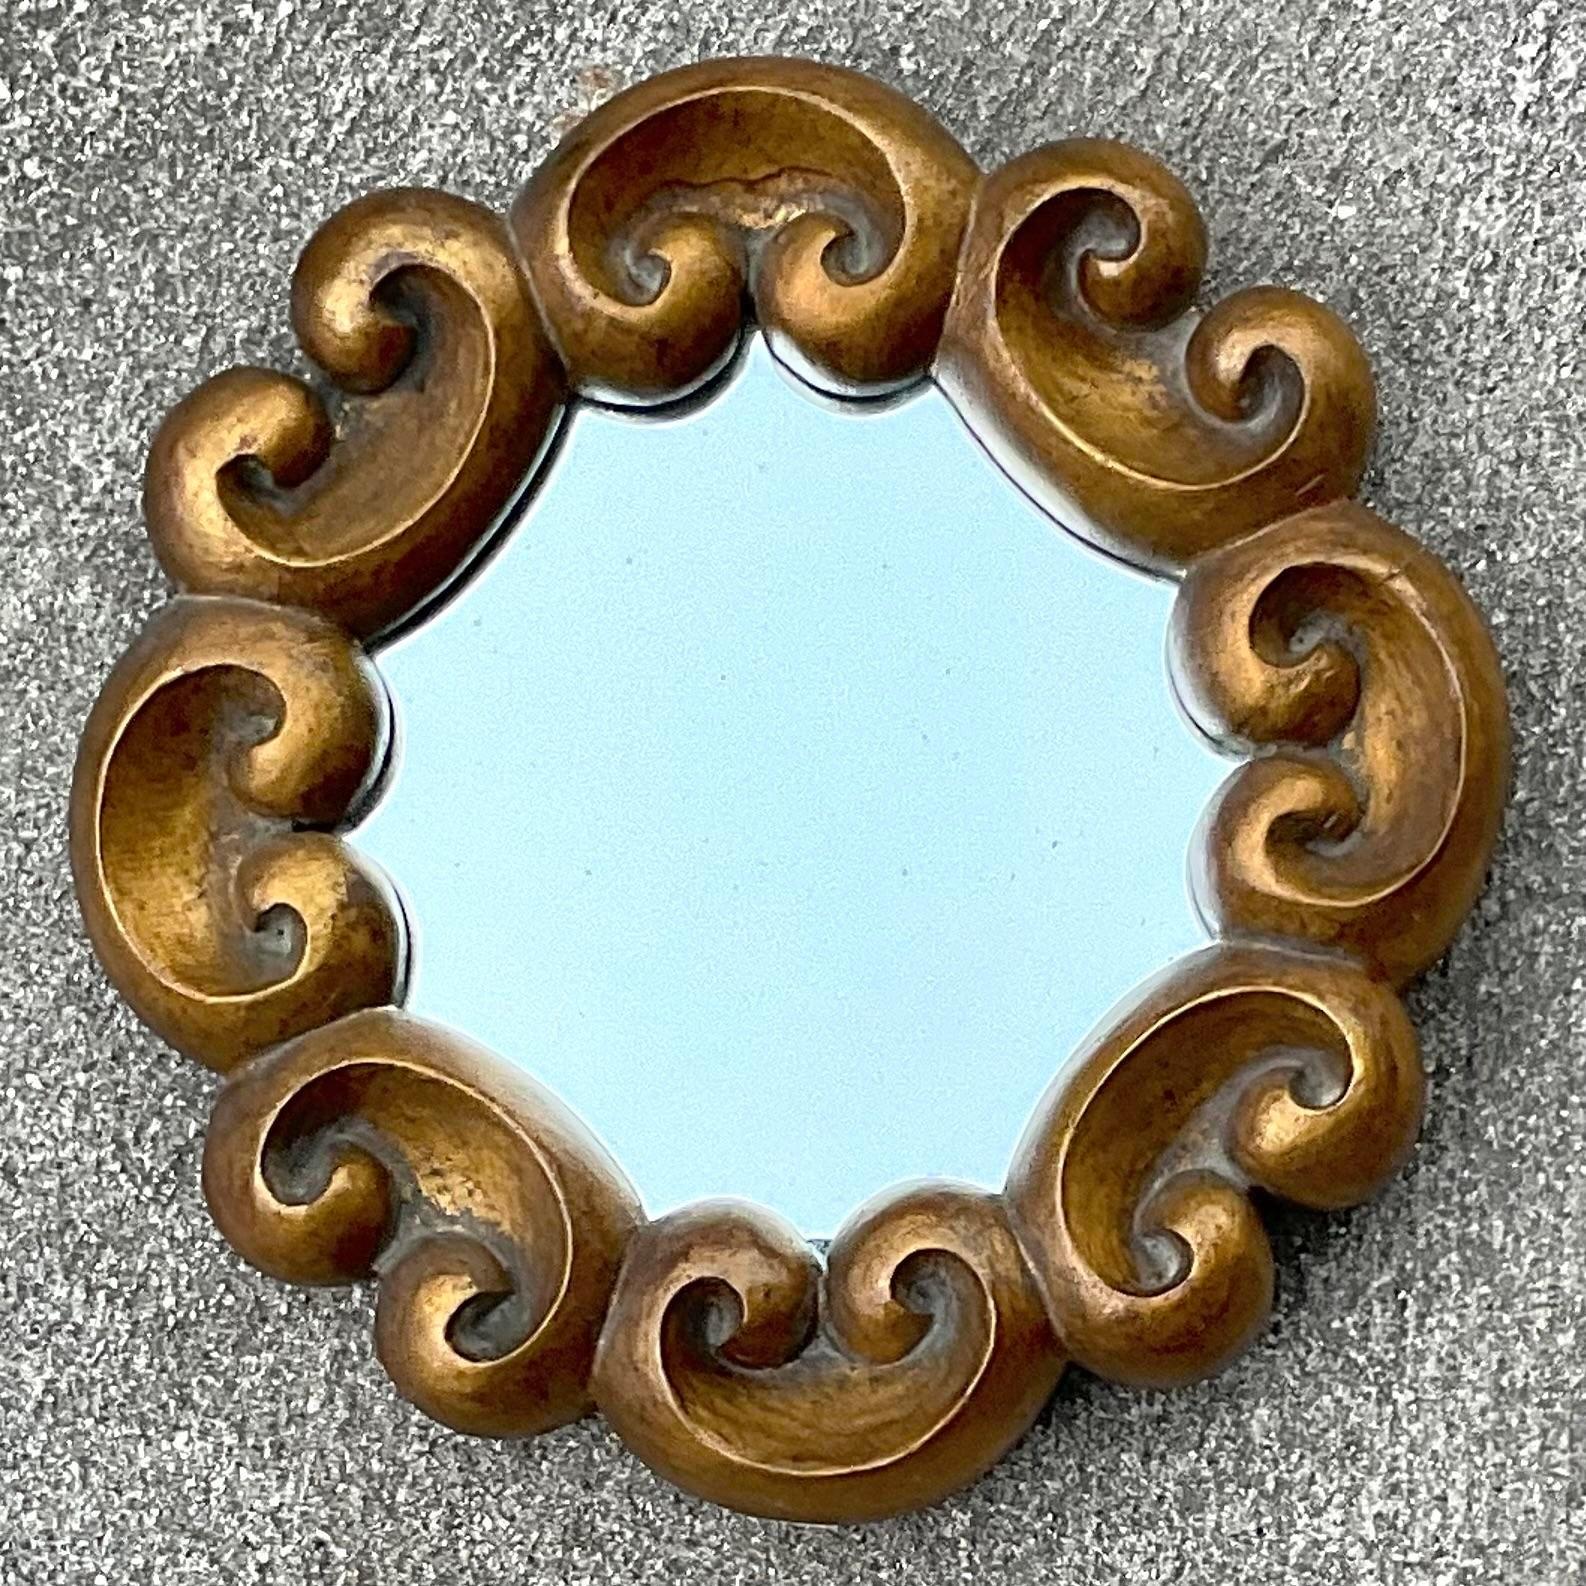 A fabulous vintage Boho wall mirror. A thick gilt frame with charming swirl detail. Acquired from a Palm Beach estate.